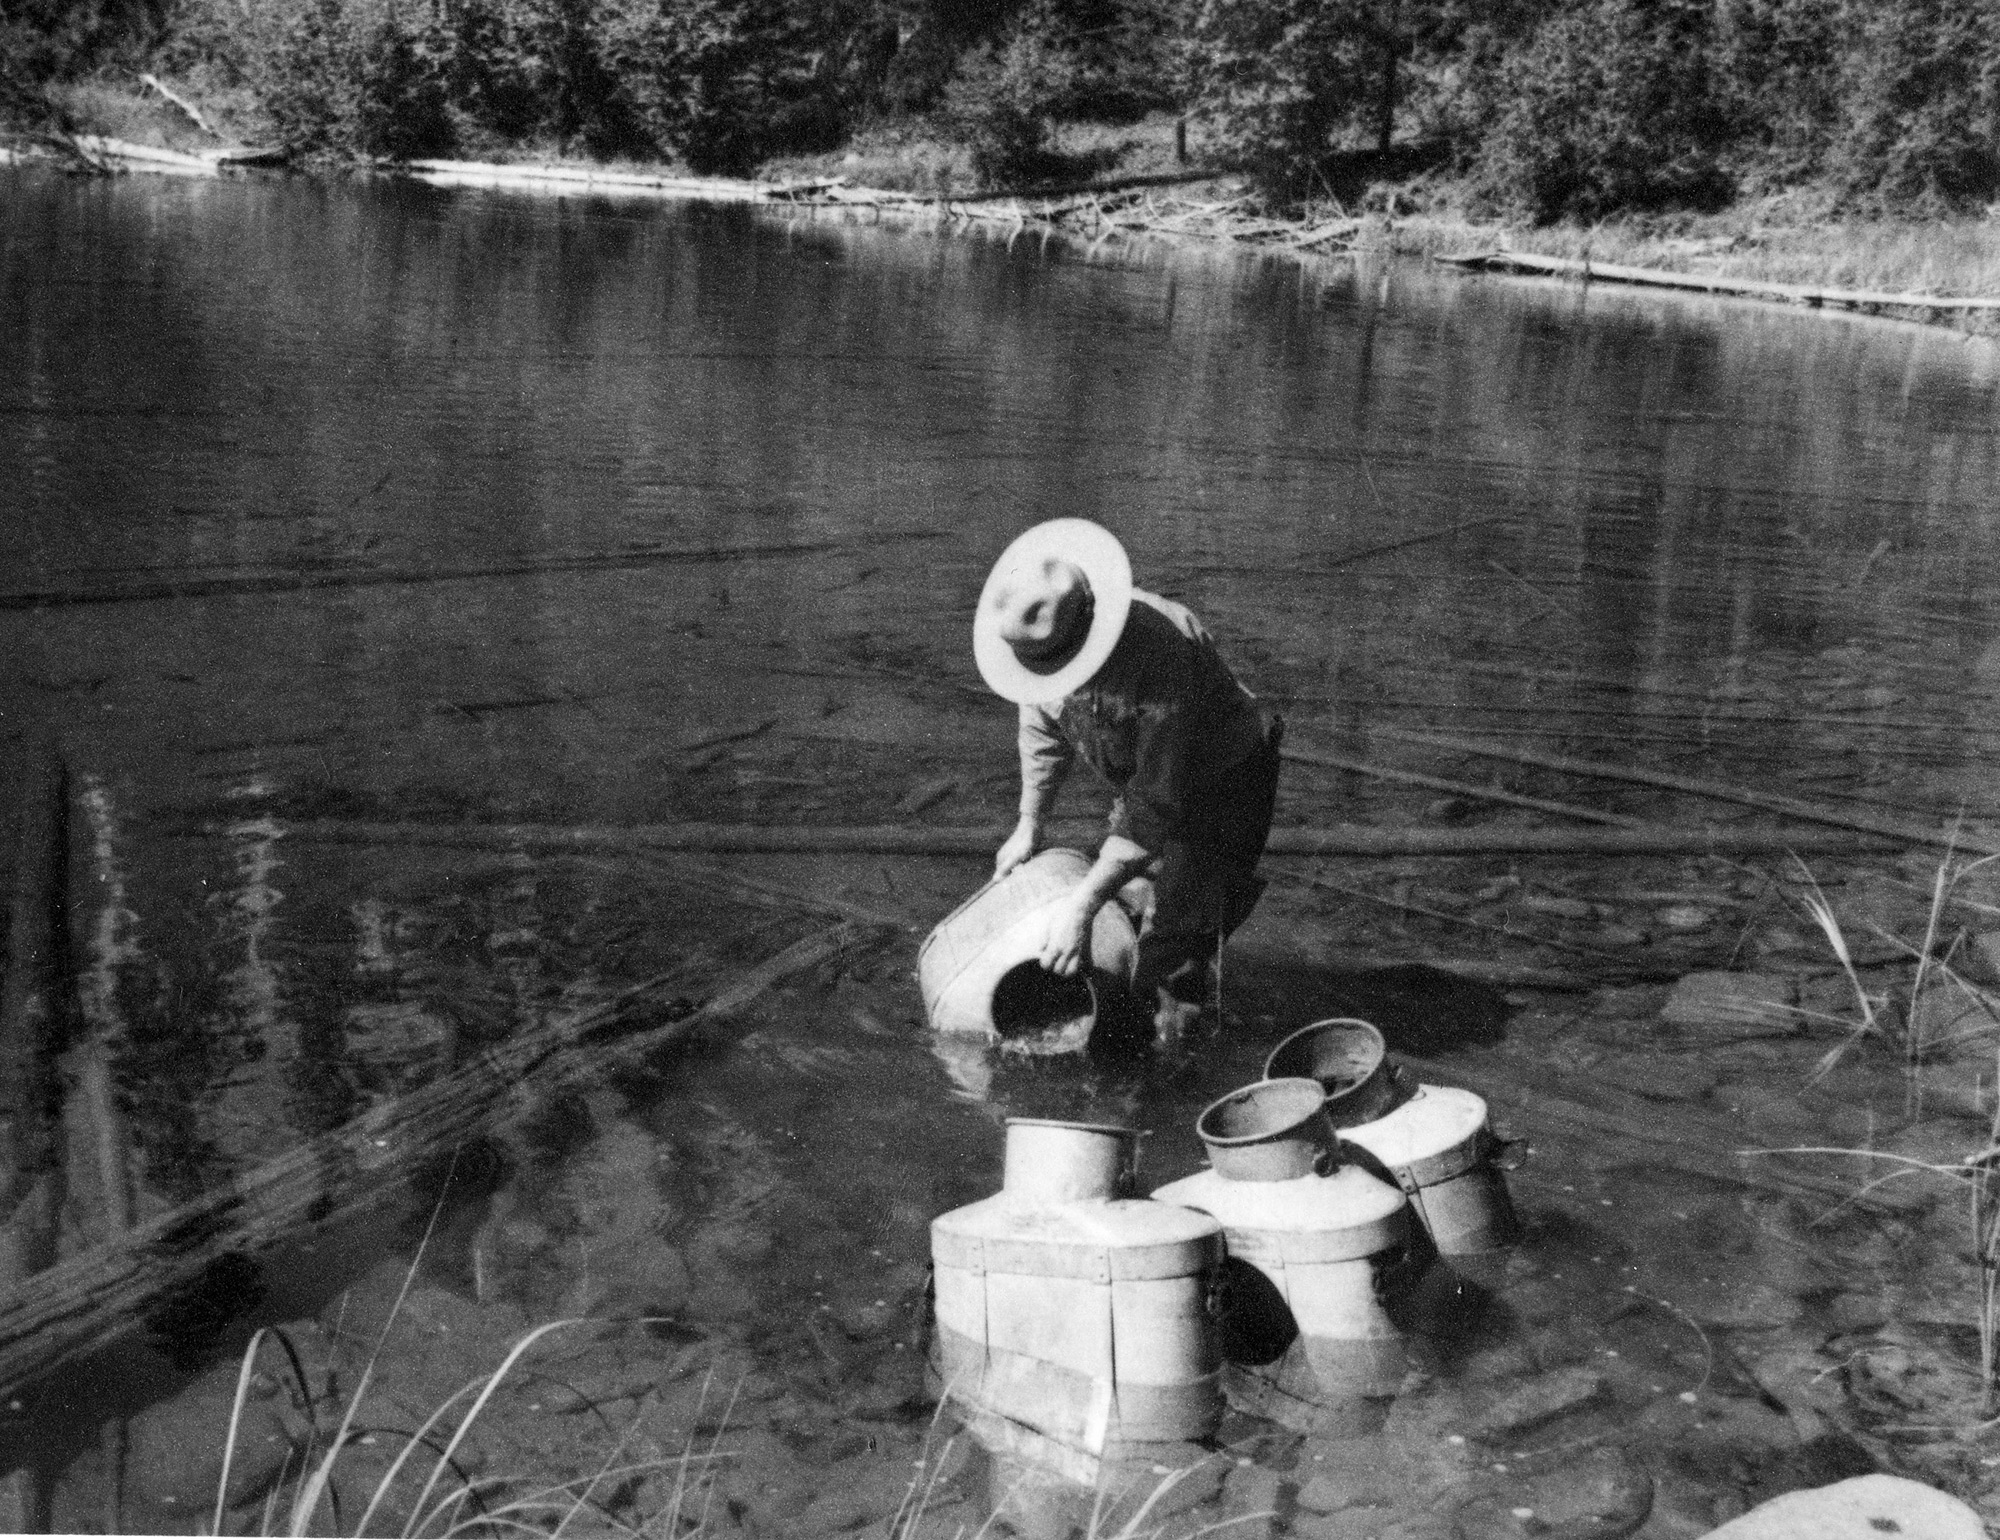 American Fly Fishing: A History: Schullery, Paul, B&W Photographs